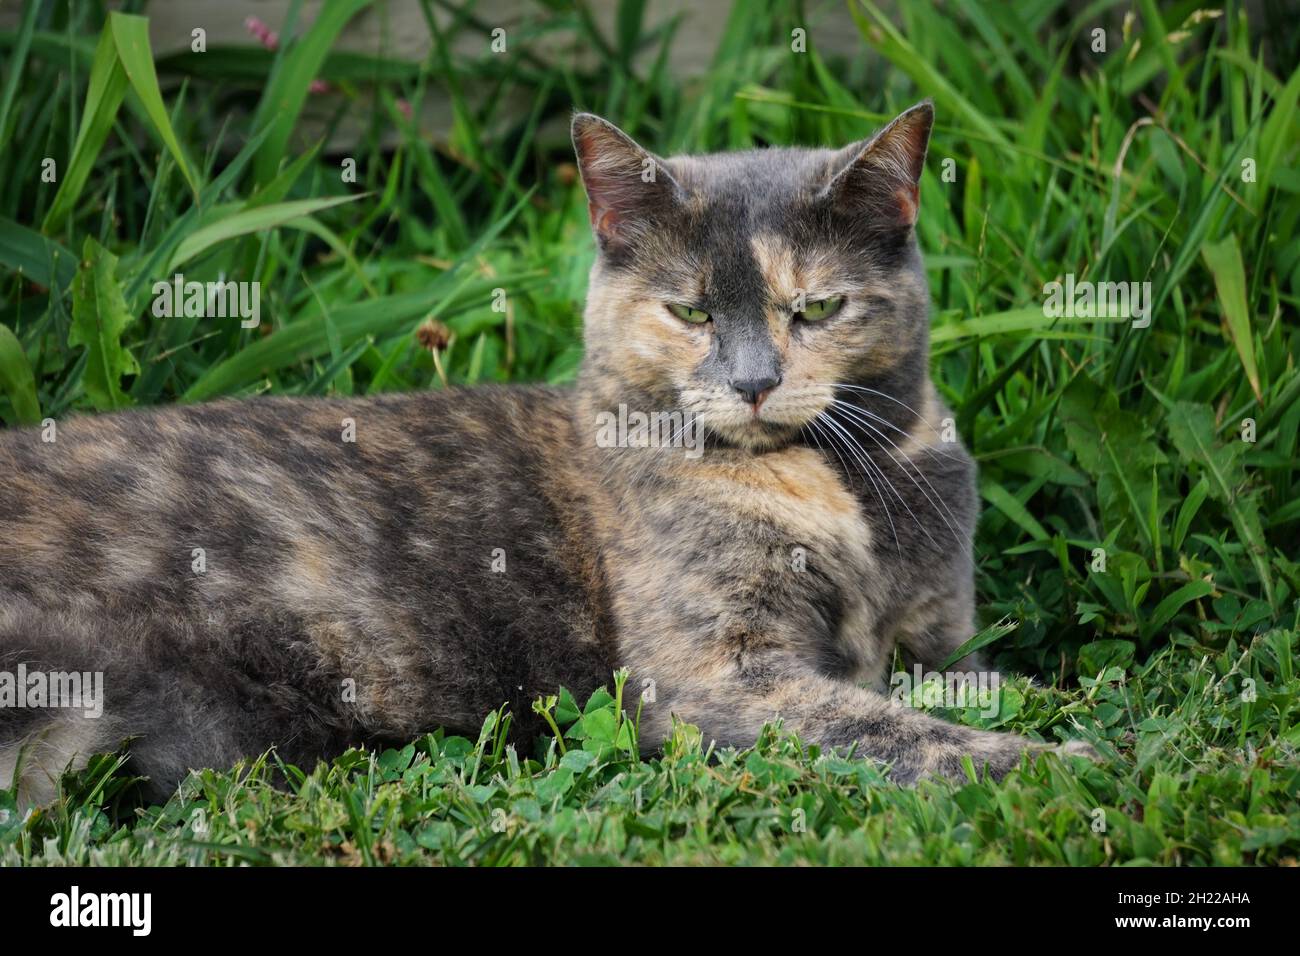 A dilute calico cat laying outside in the grass, looking at the camera. Stock Photo